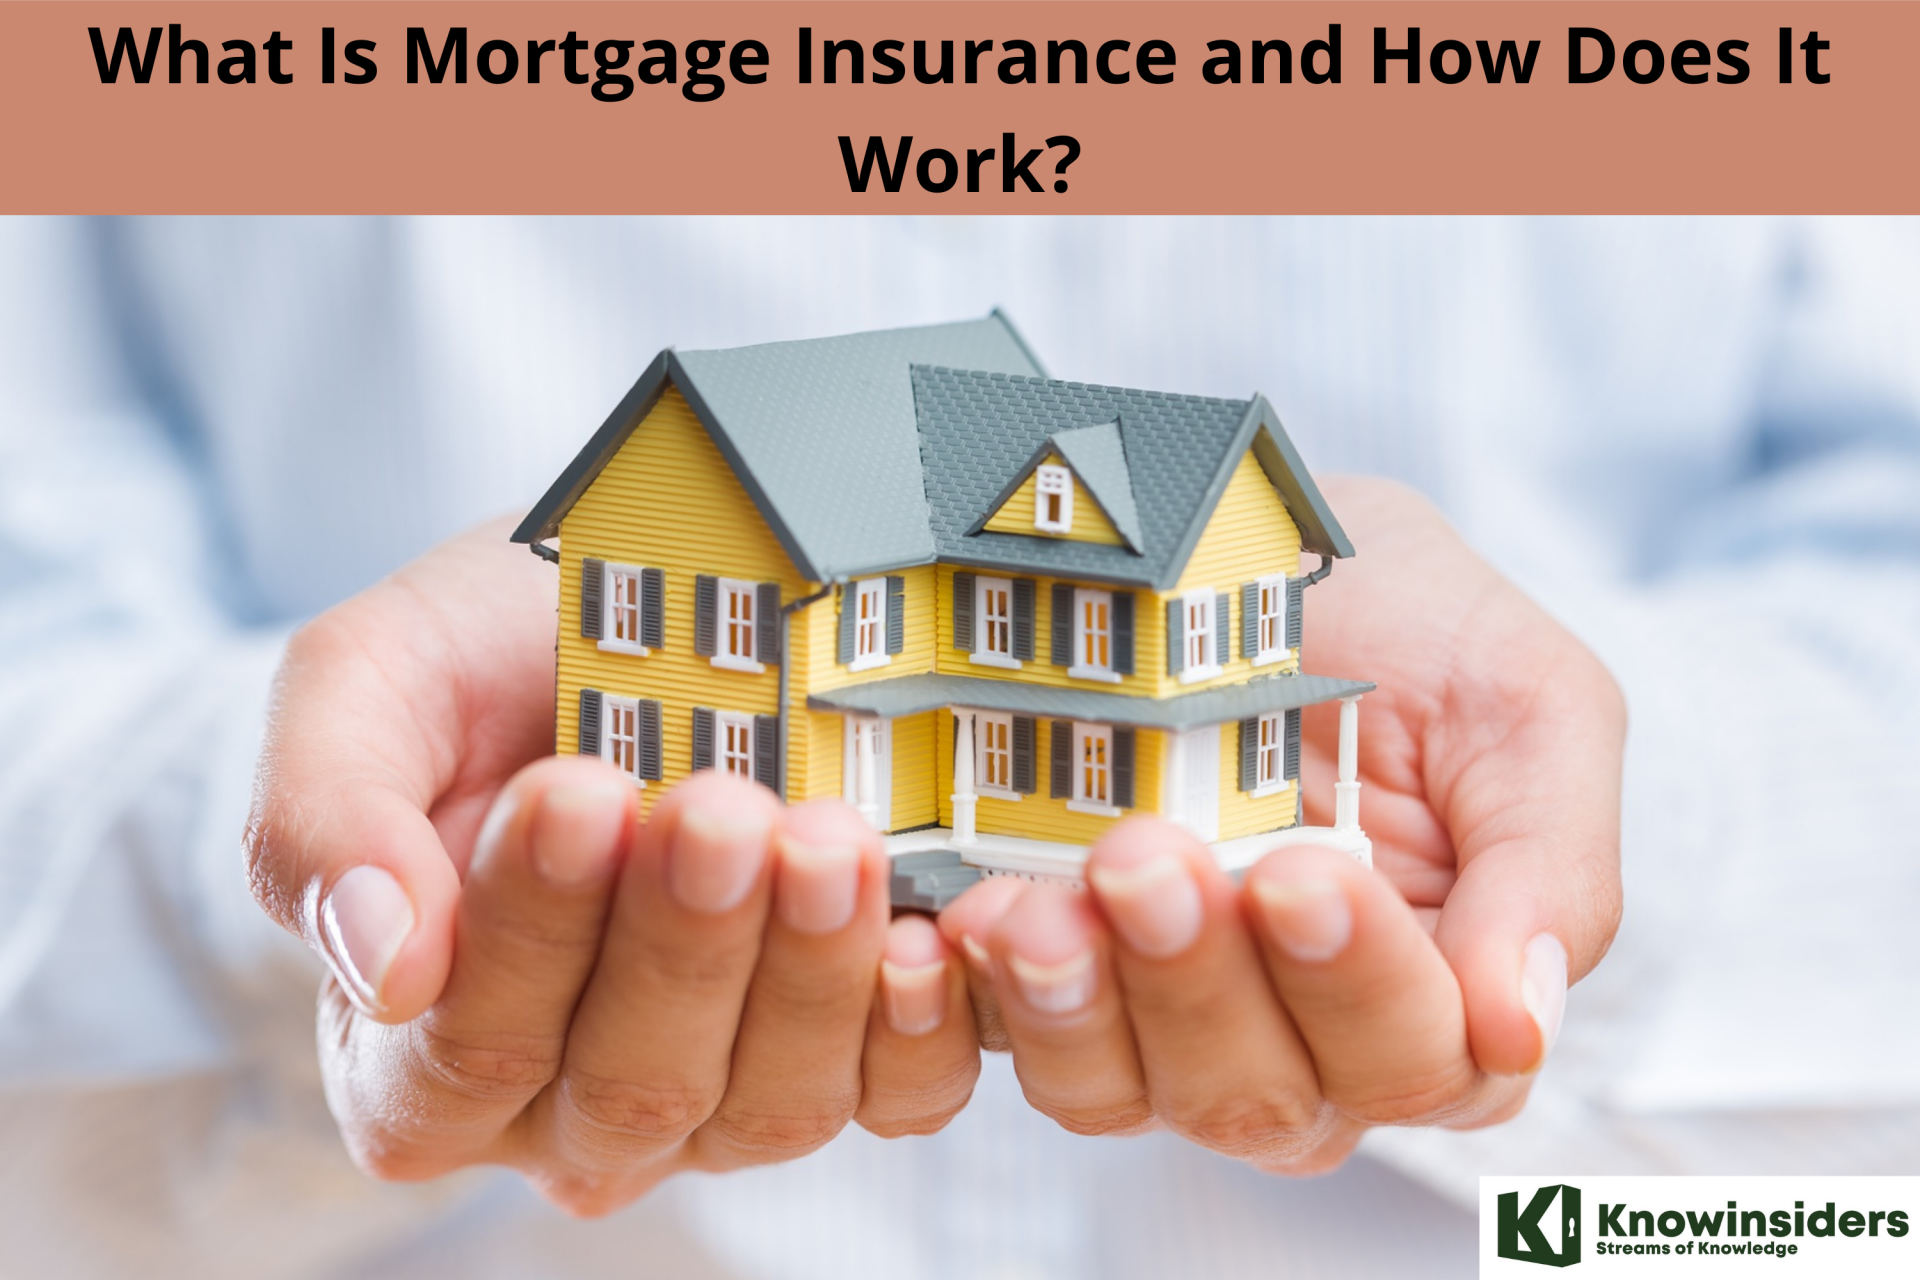 What Is Mortgage Insurance and How Does It Work?